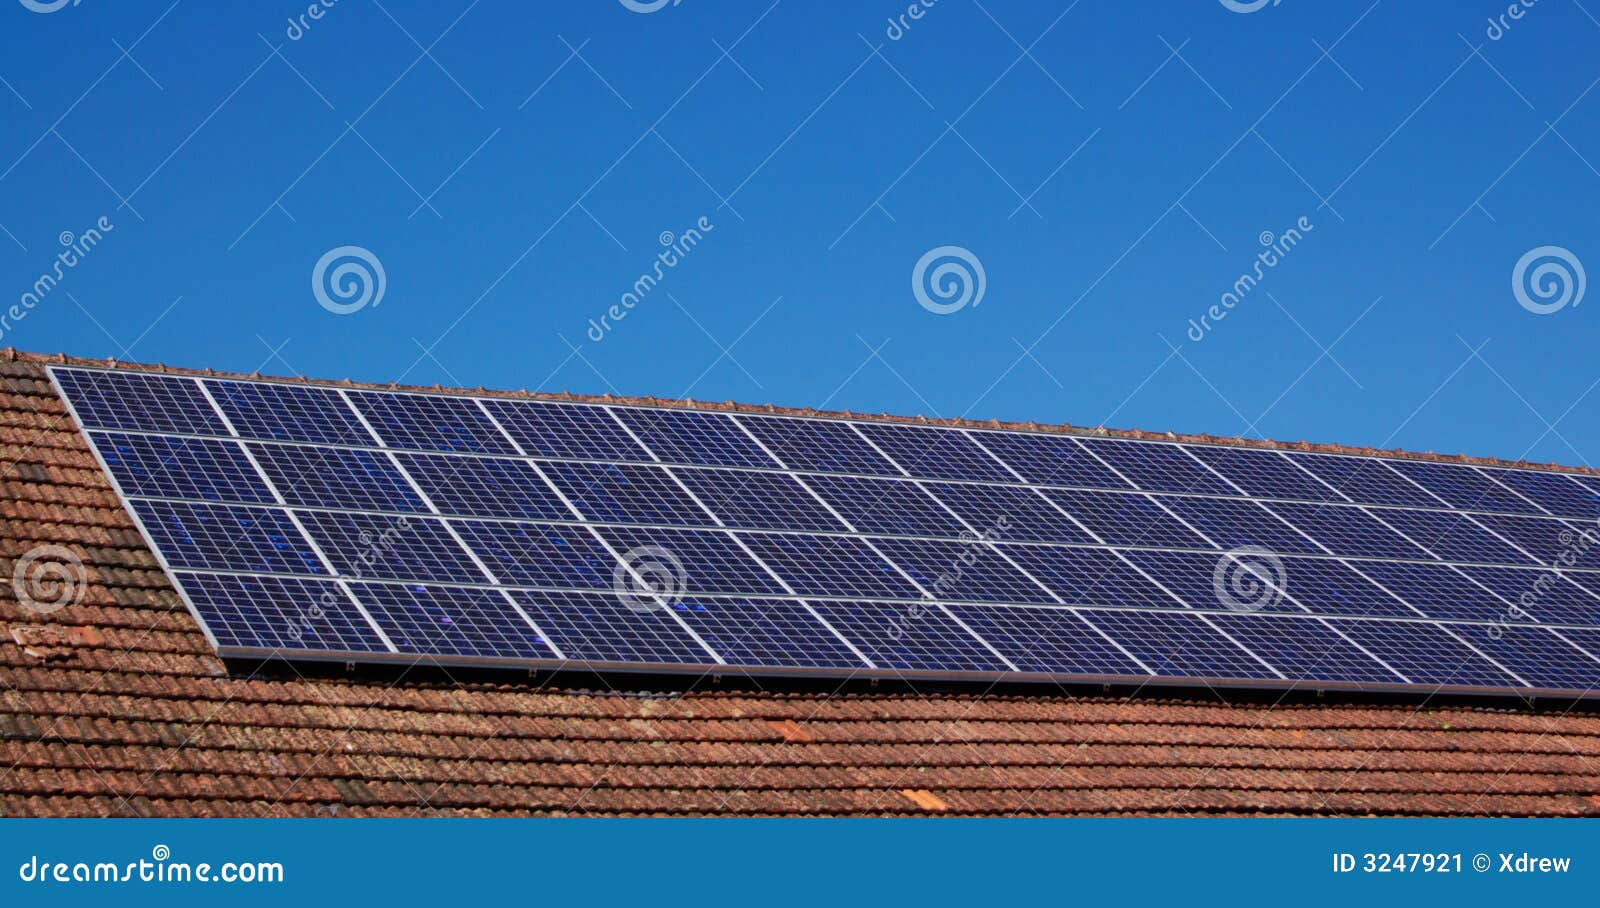 Roof With Solar Panels Stock Image - Image: 3247921